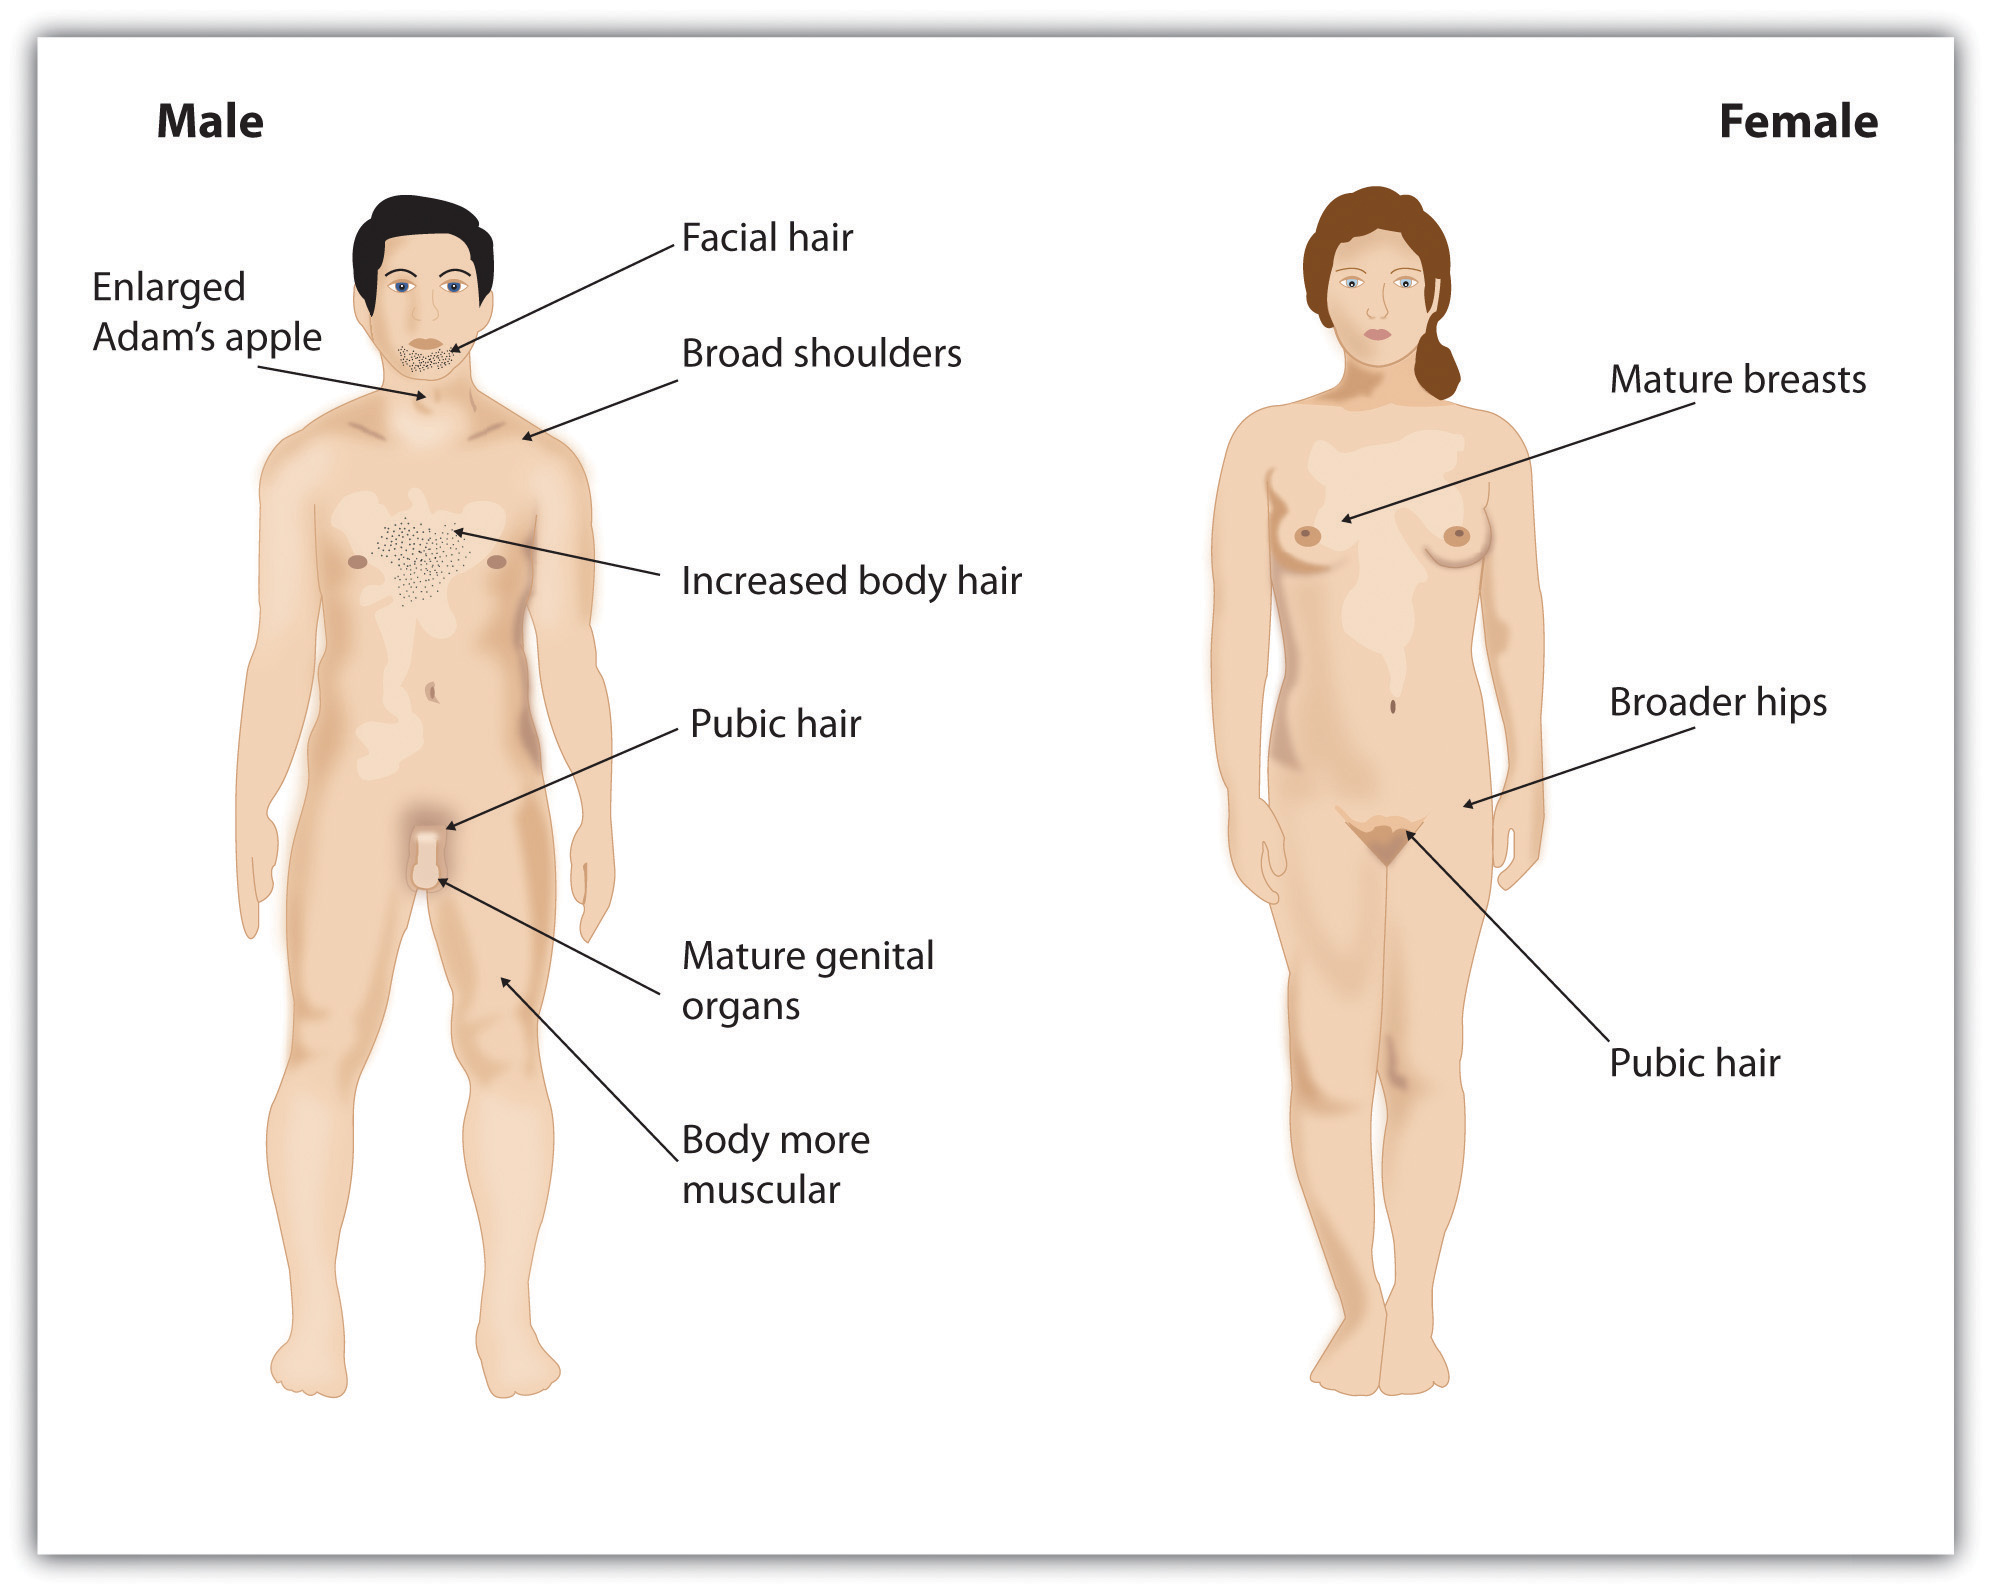 Nude man and woman with sex characteristic parts of the body labeled